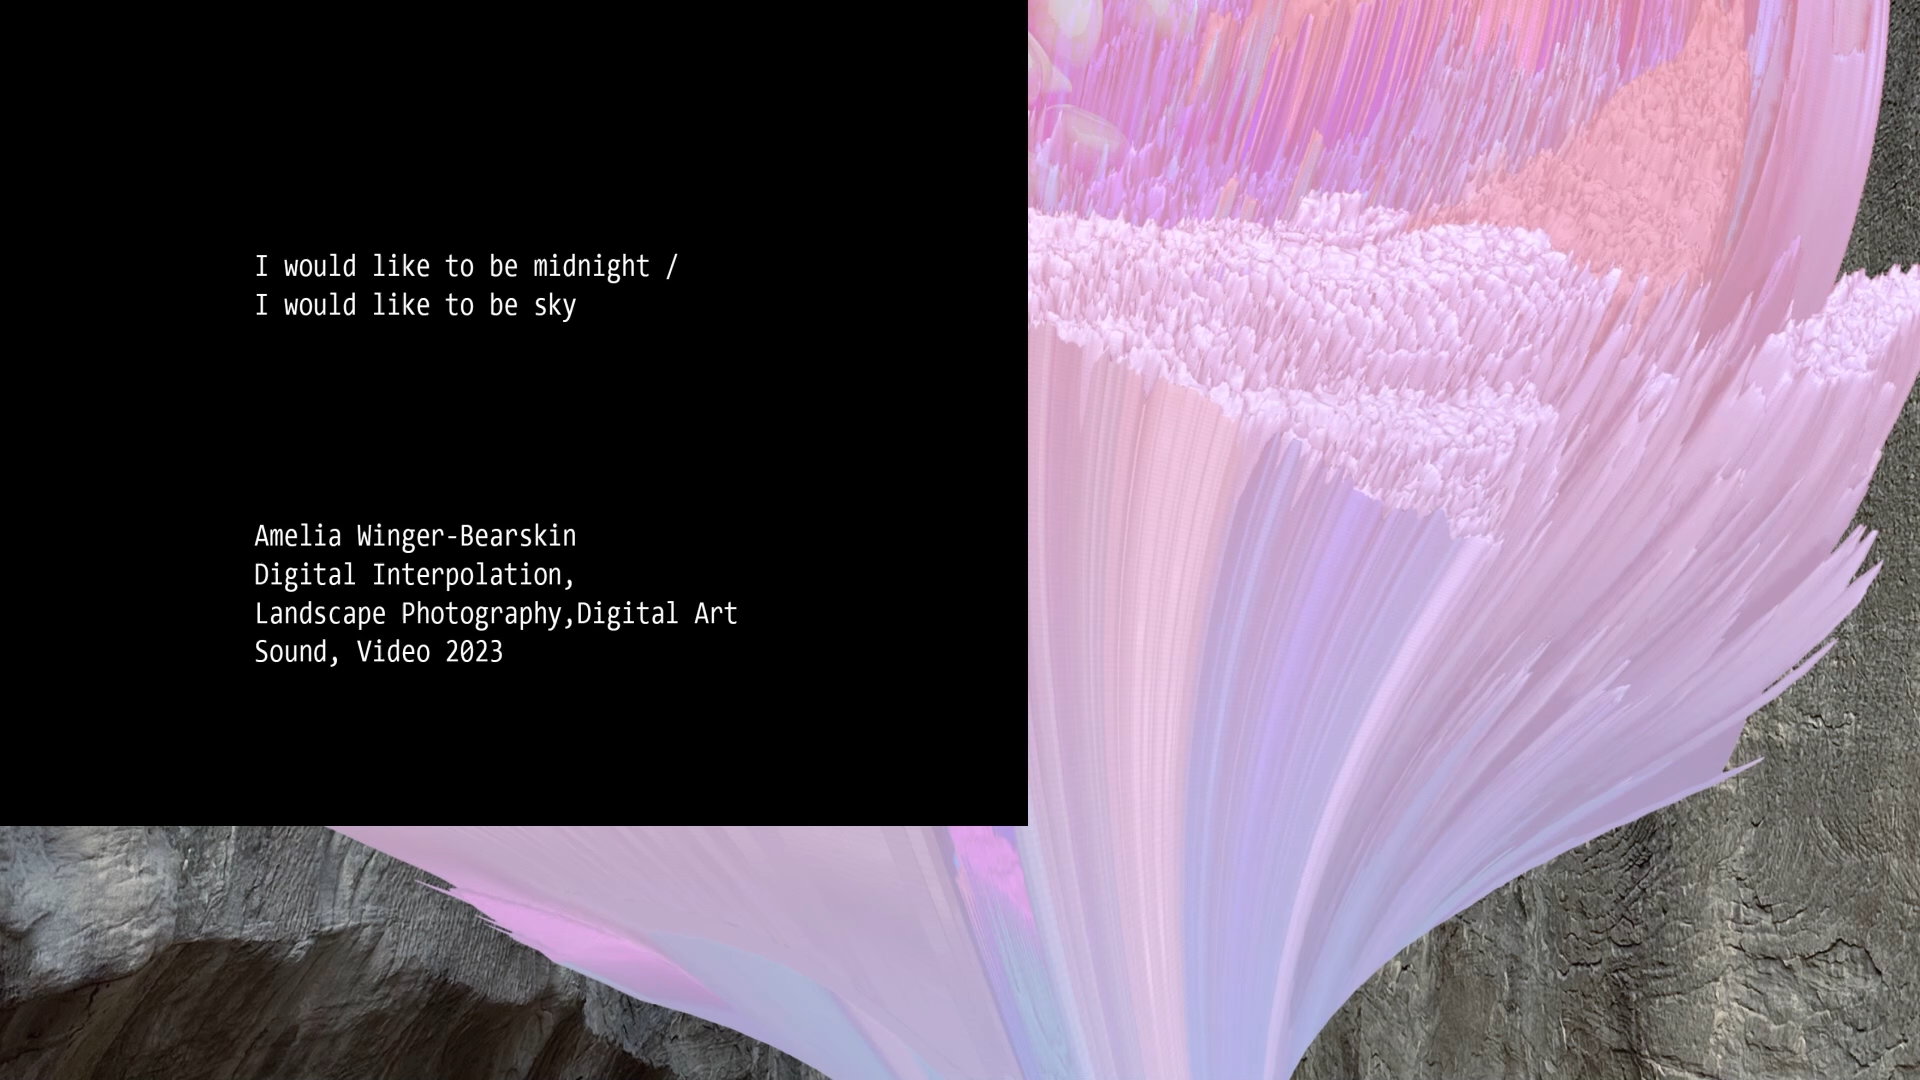 Amelia Winger-Bearskin, I would like to be midnight / I would like to be Sky, 2023. Digital Video, digital interpolation, landscape photography, and sound, 10:27. Courtesy of the artist